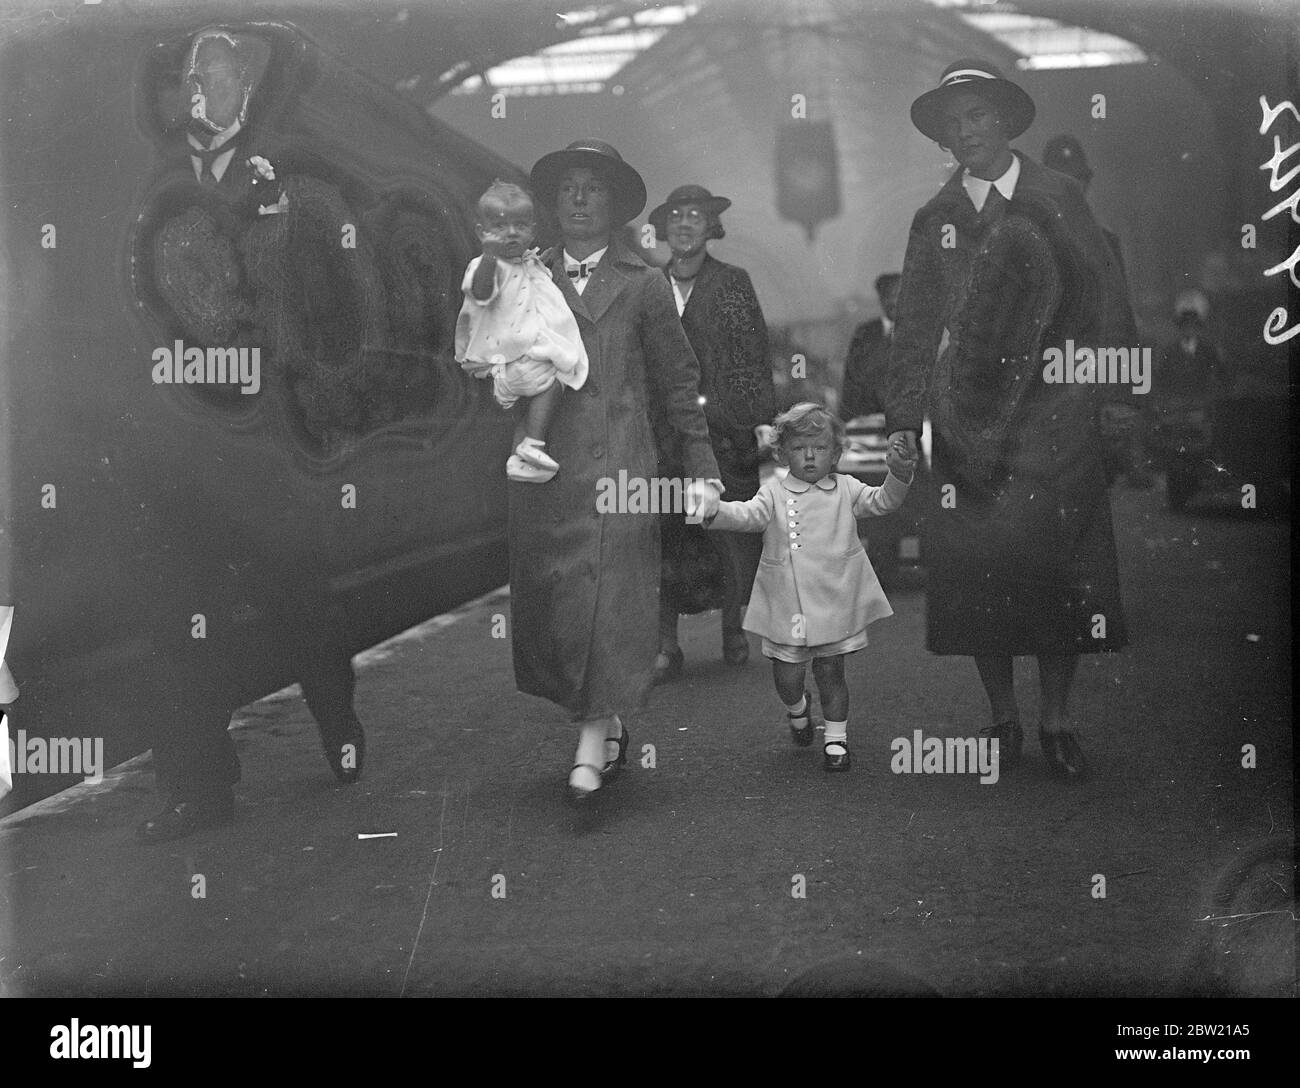 Prince Eduard and Princess Alexandra, children of Duke and Duchess of Kent, left Liverpool Street station for Sandringham, where they are to spend a holiday with Queen Mary. 27 August 1937 Stock Photo